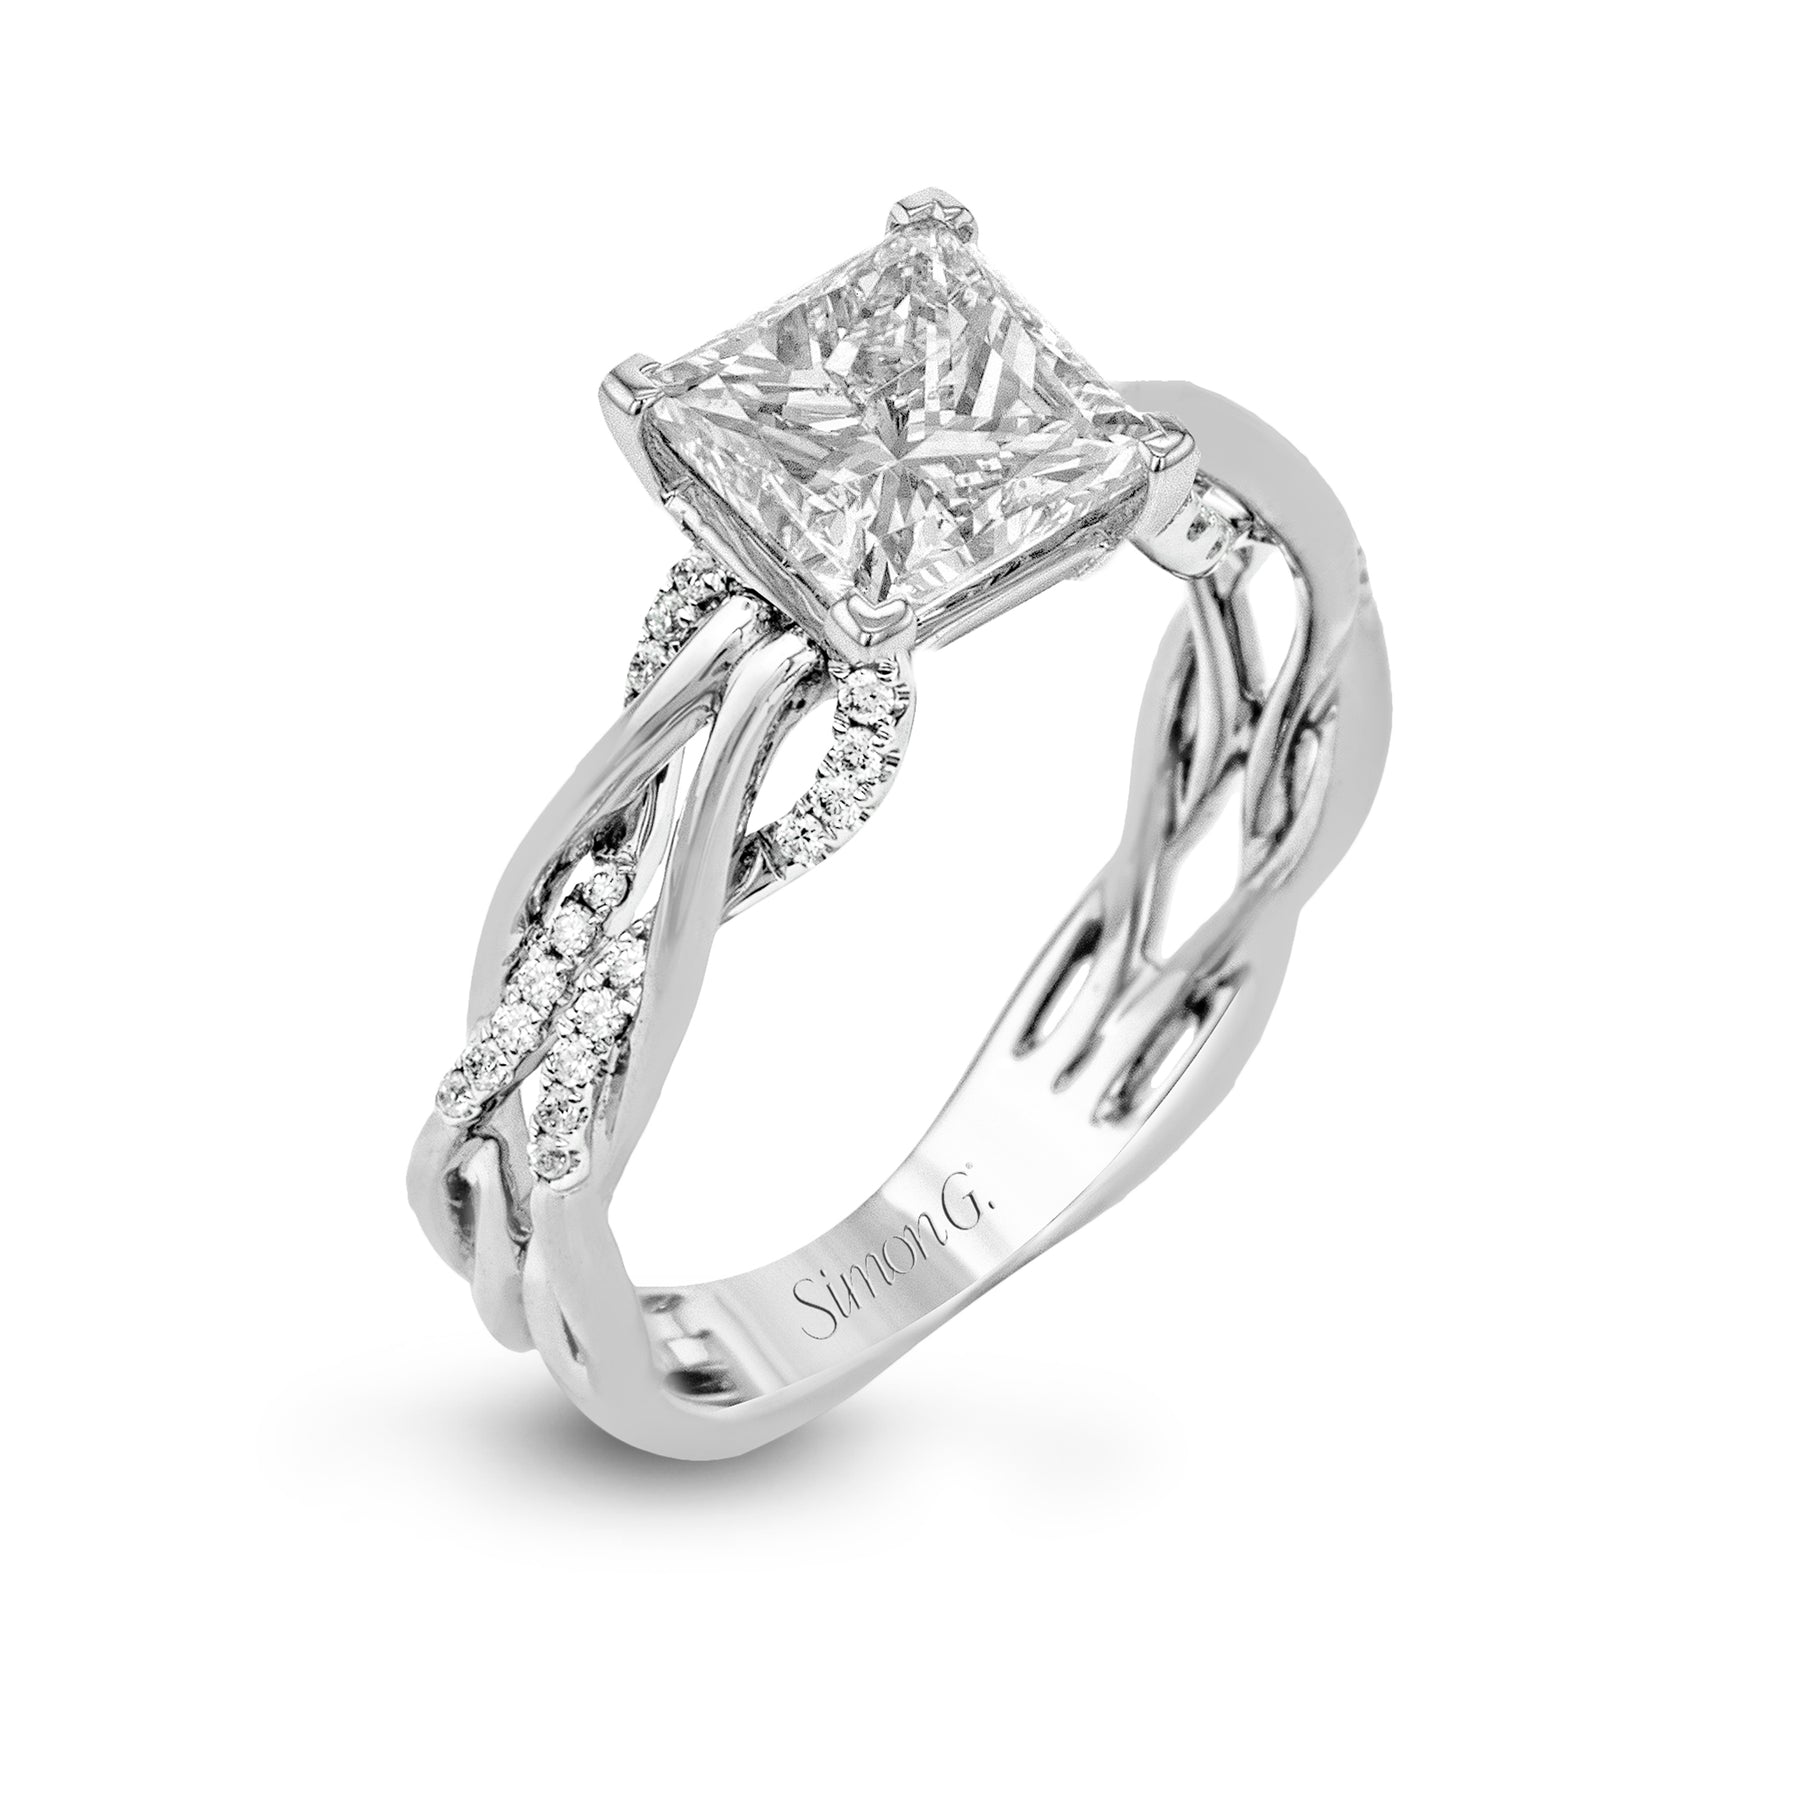 Princess-Cut Criss-Cross Engagement Ring In 18k Gold With Diamonds MR2514-PC